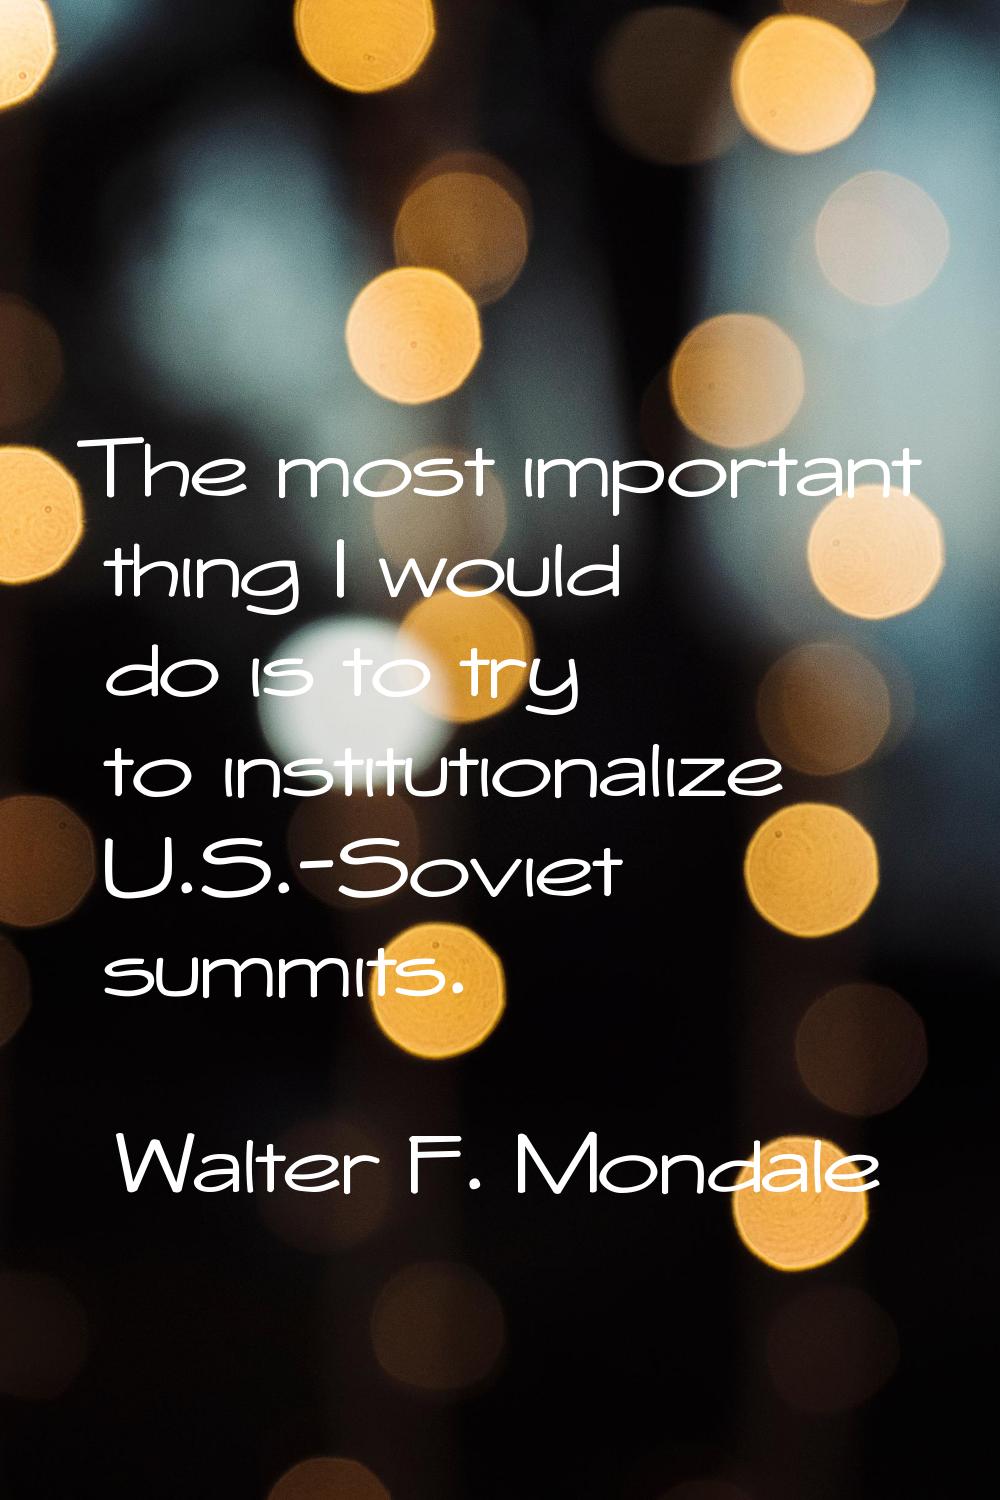 The most important thing I would do is to try to institutionalize U.S.-Soviet summits.